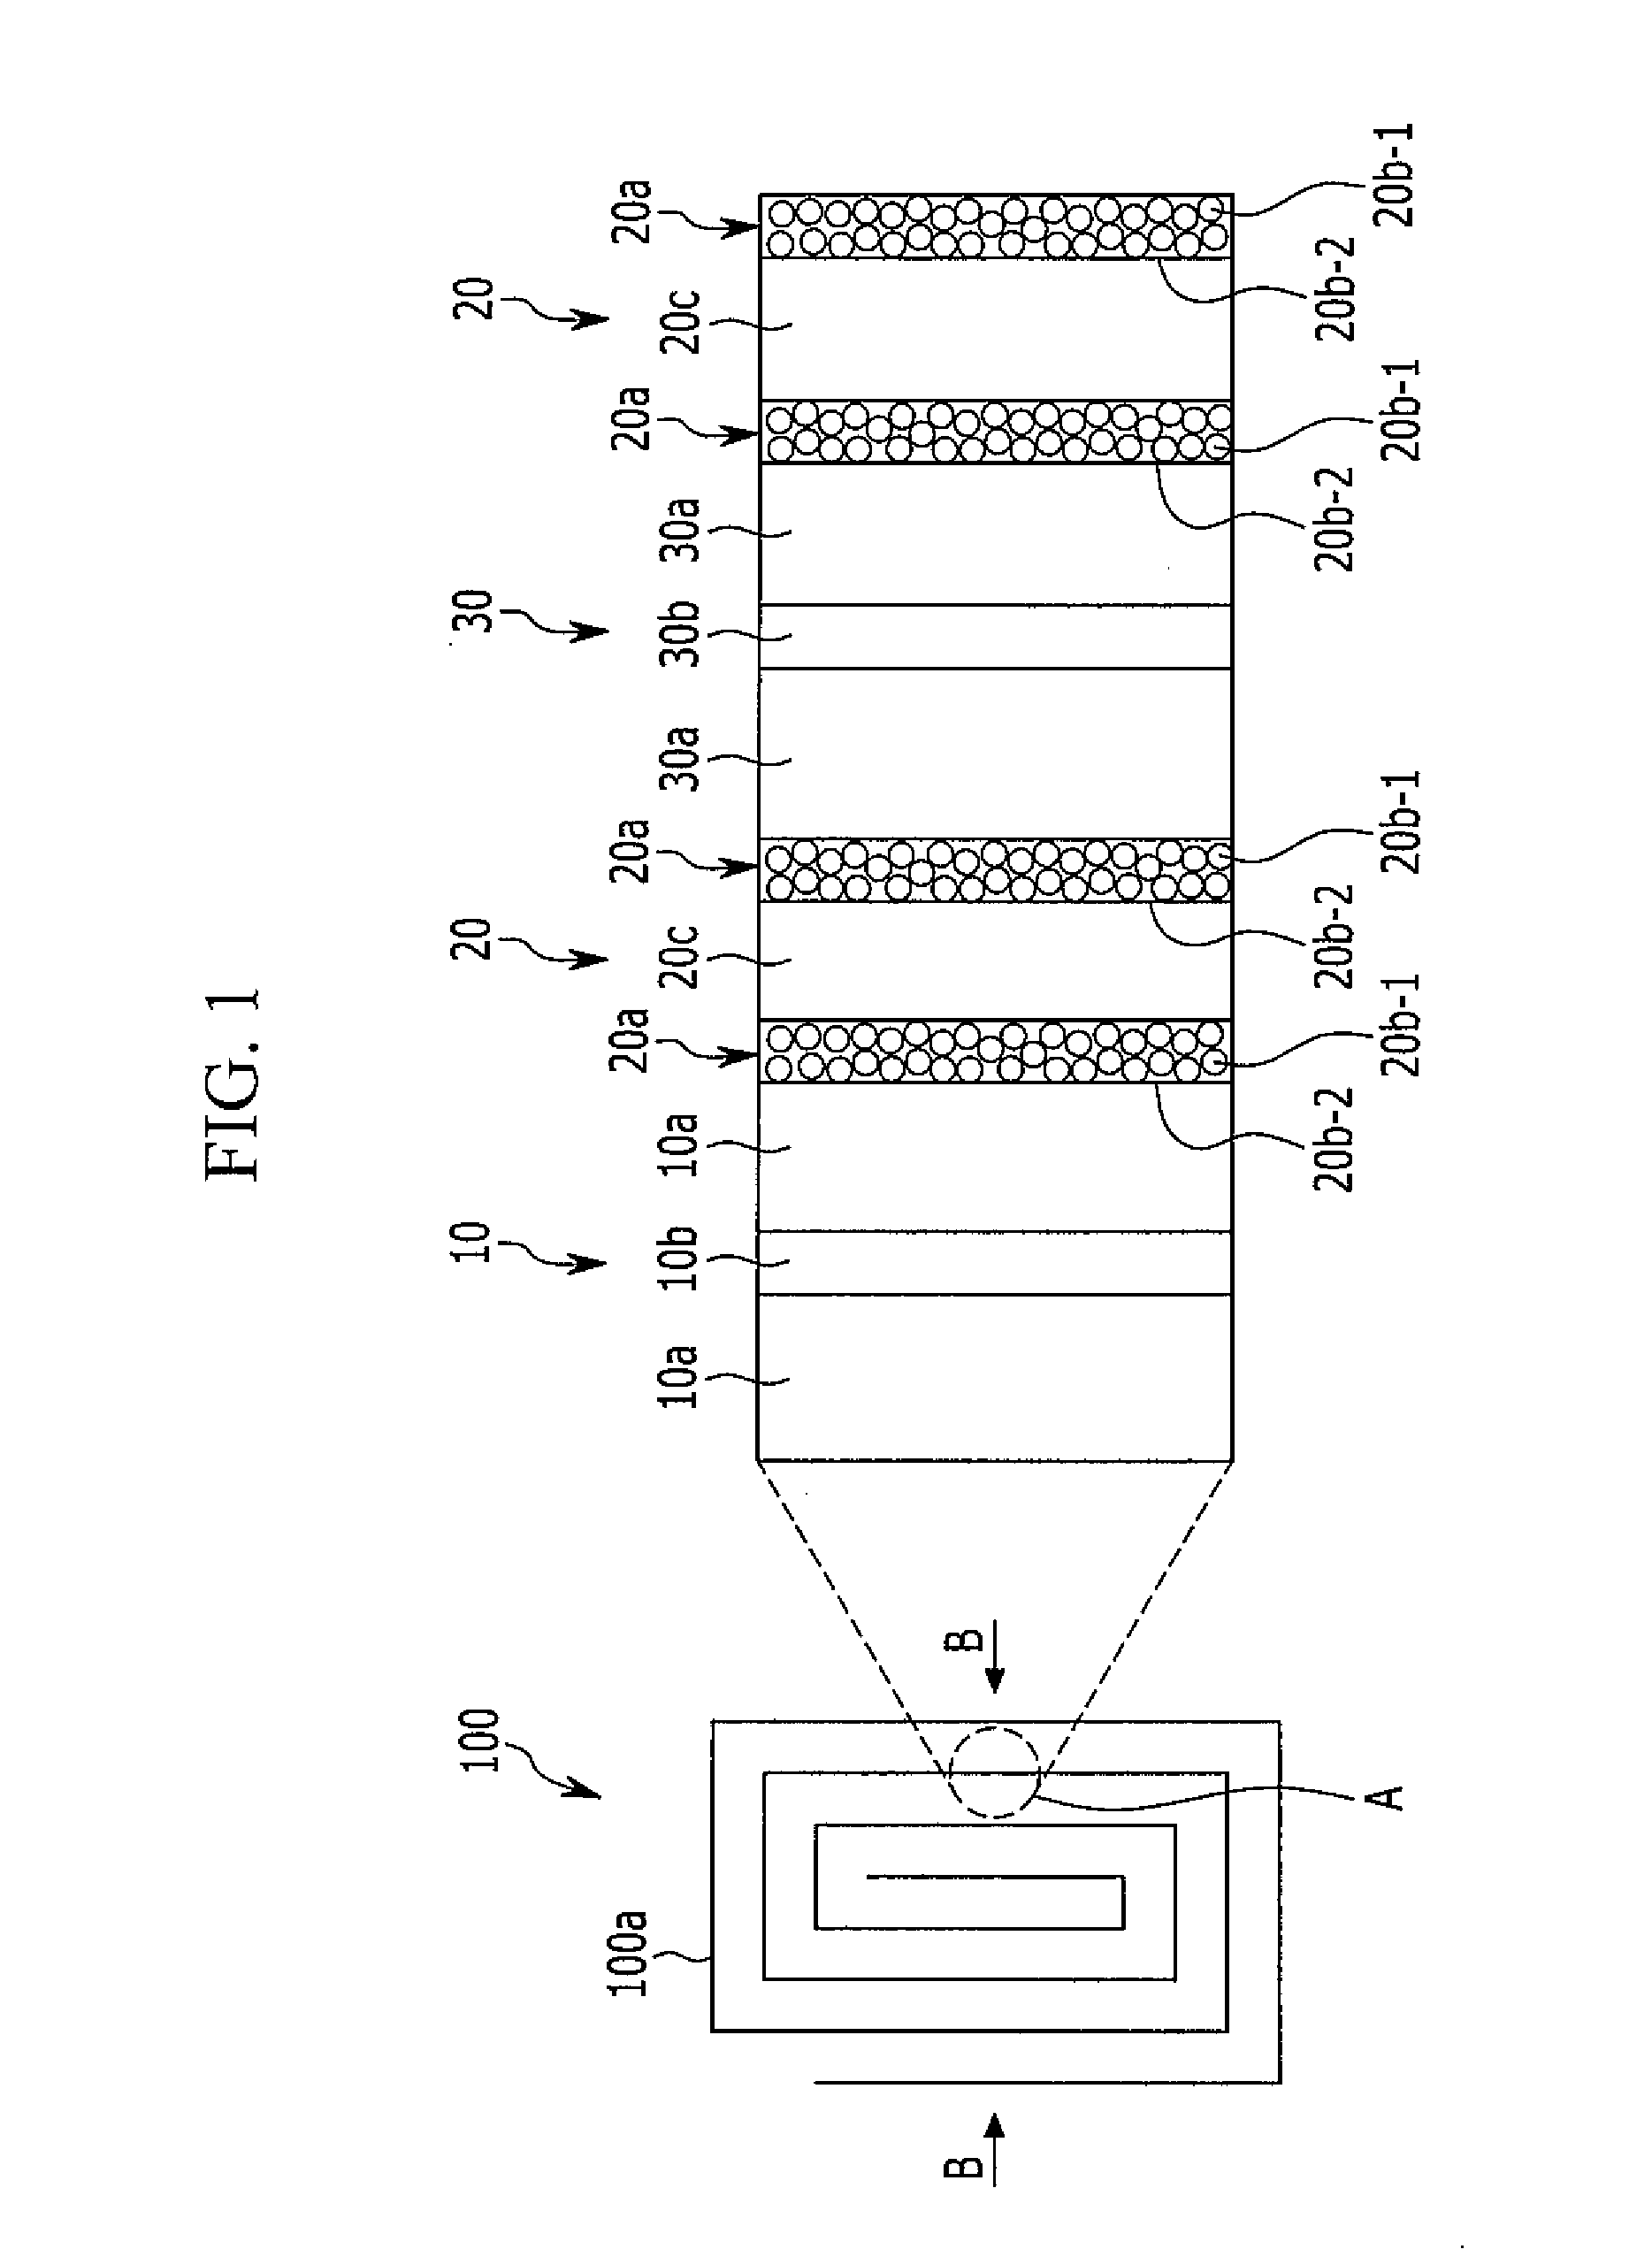 Spirally-wound electrode assembly for rechargeable lithium battery and rechargeable lithium battery including same